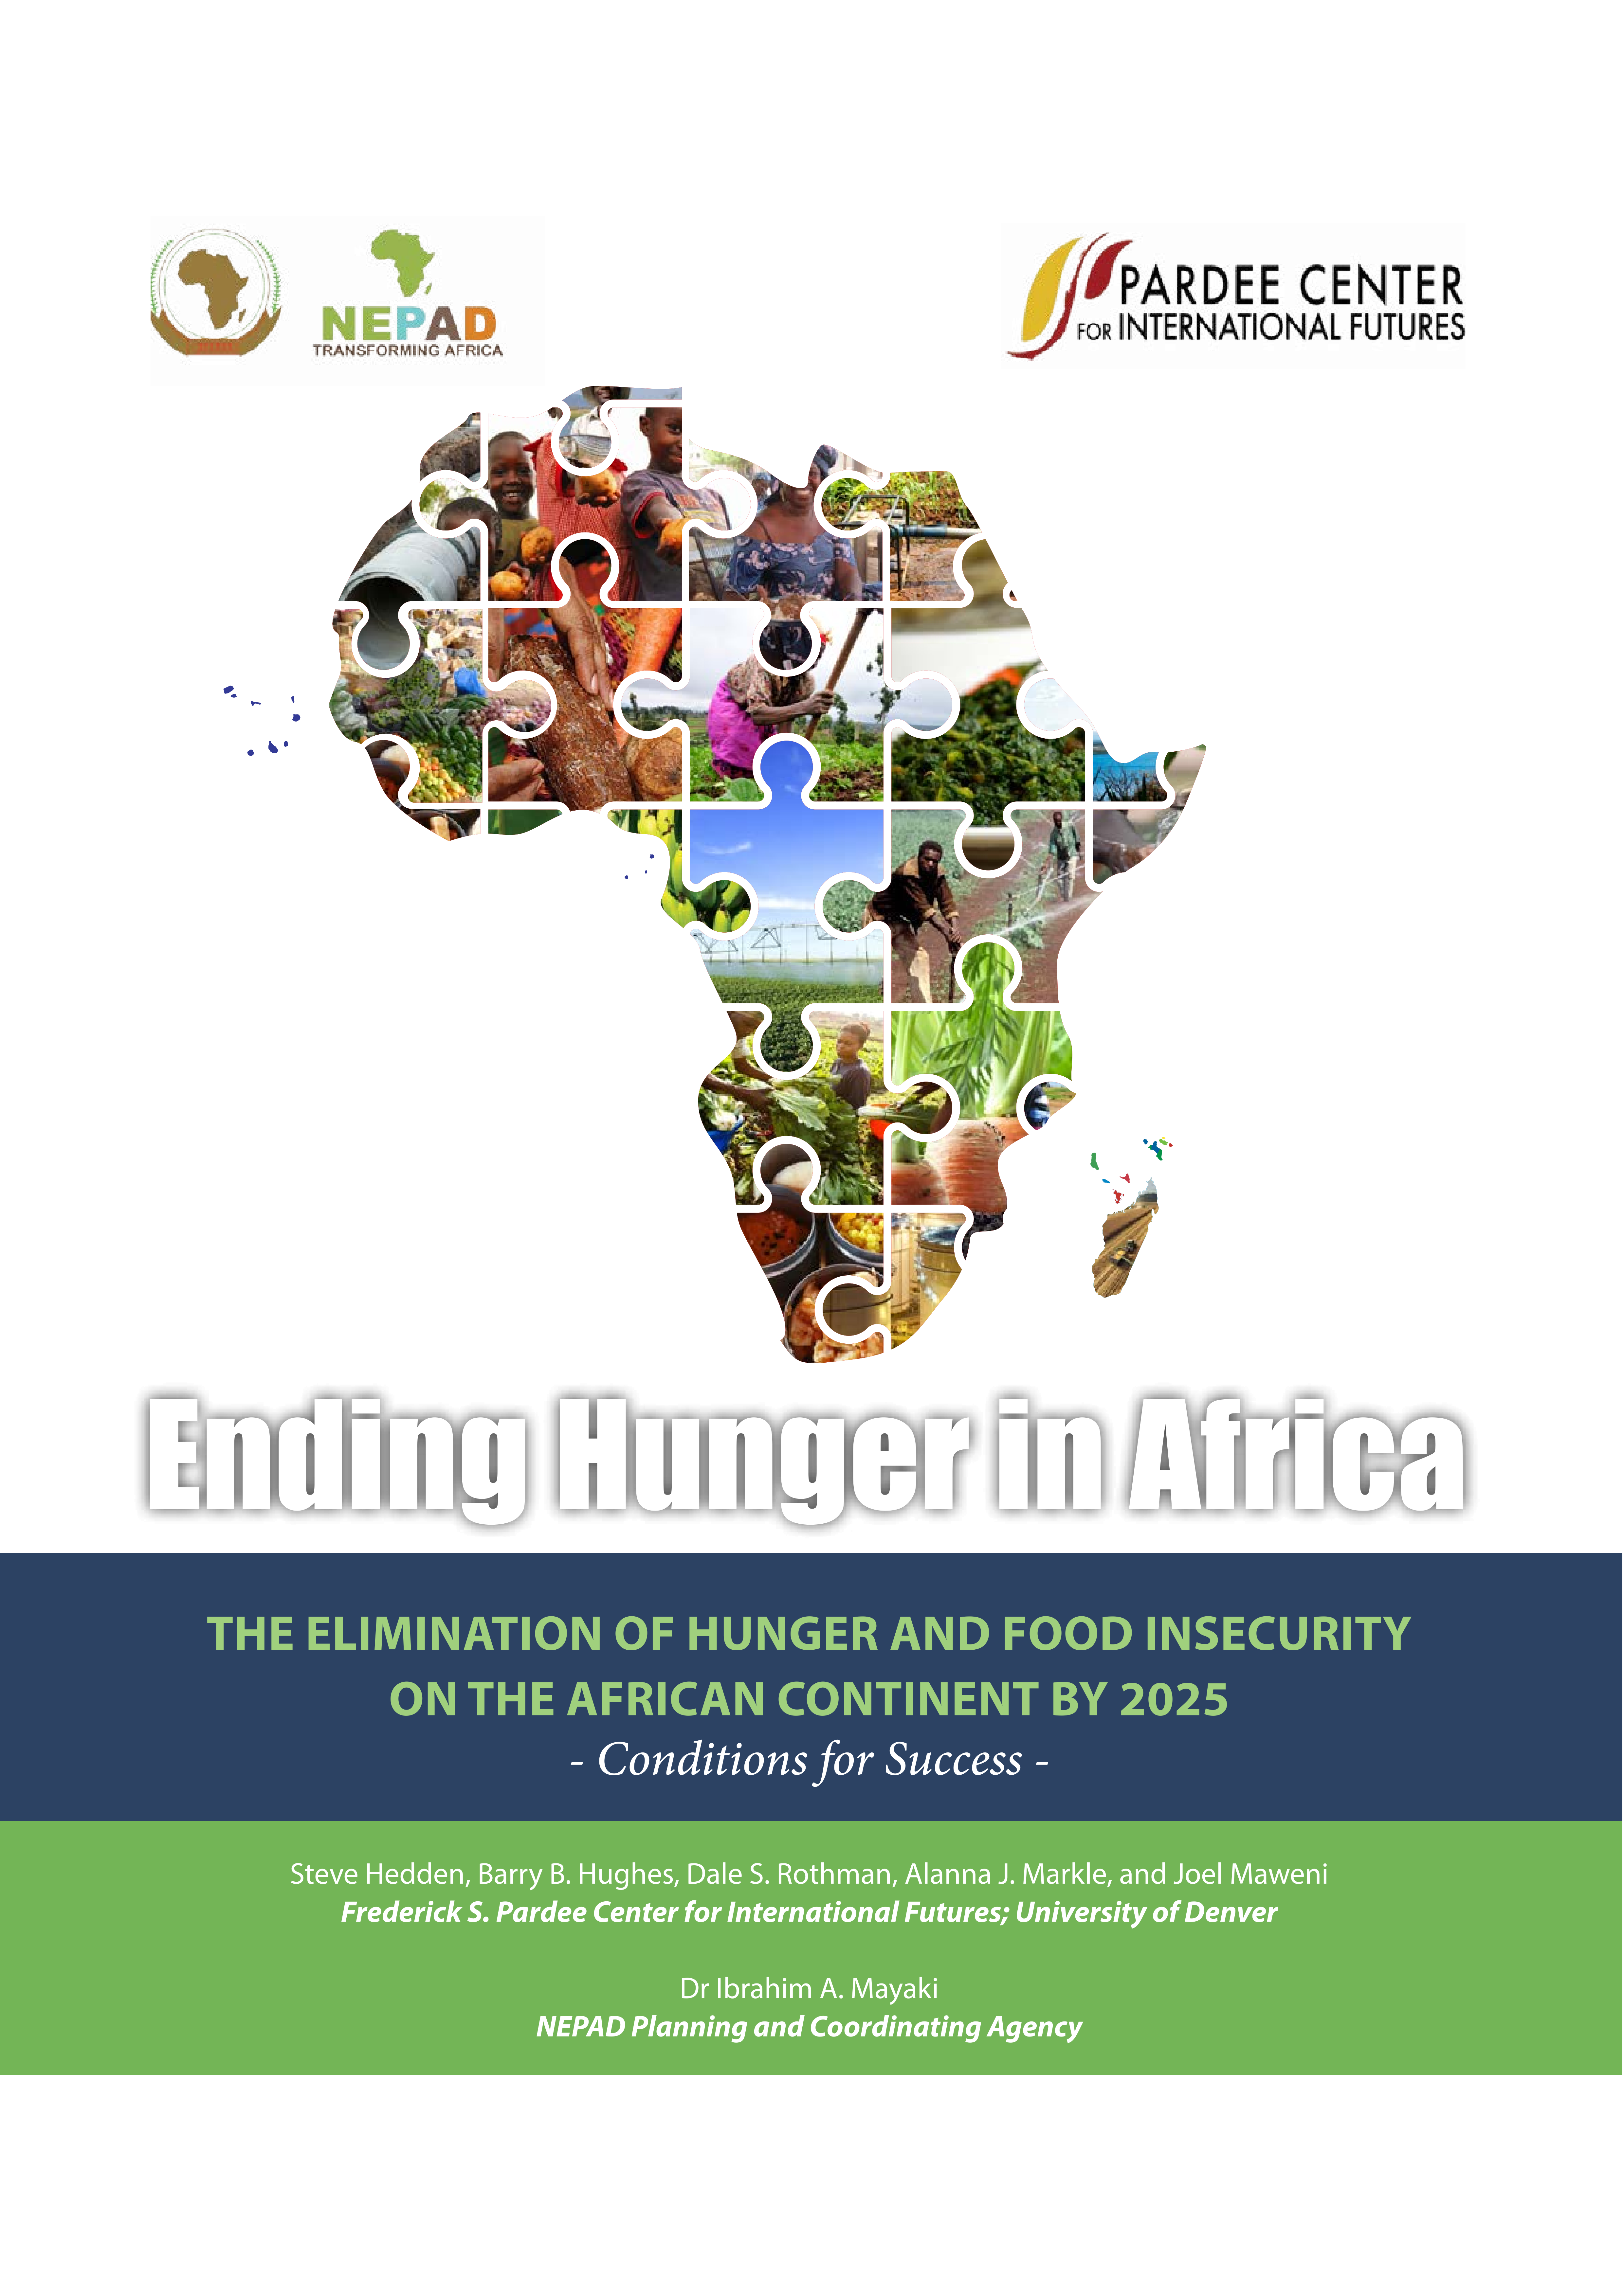 New report details &#8220;conditions for success&#8221; to achieve zero hunger in Africa